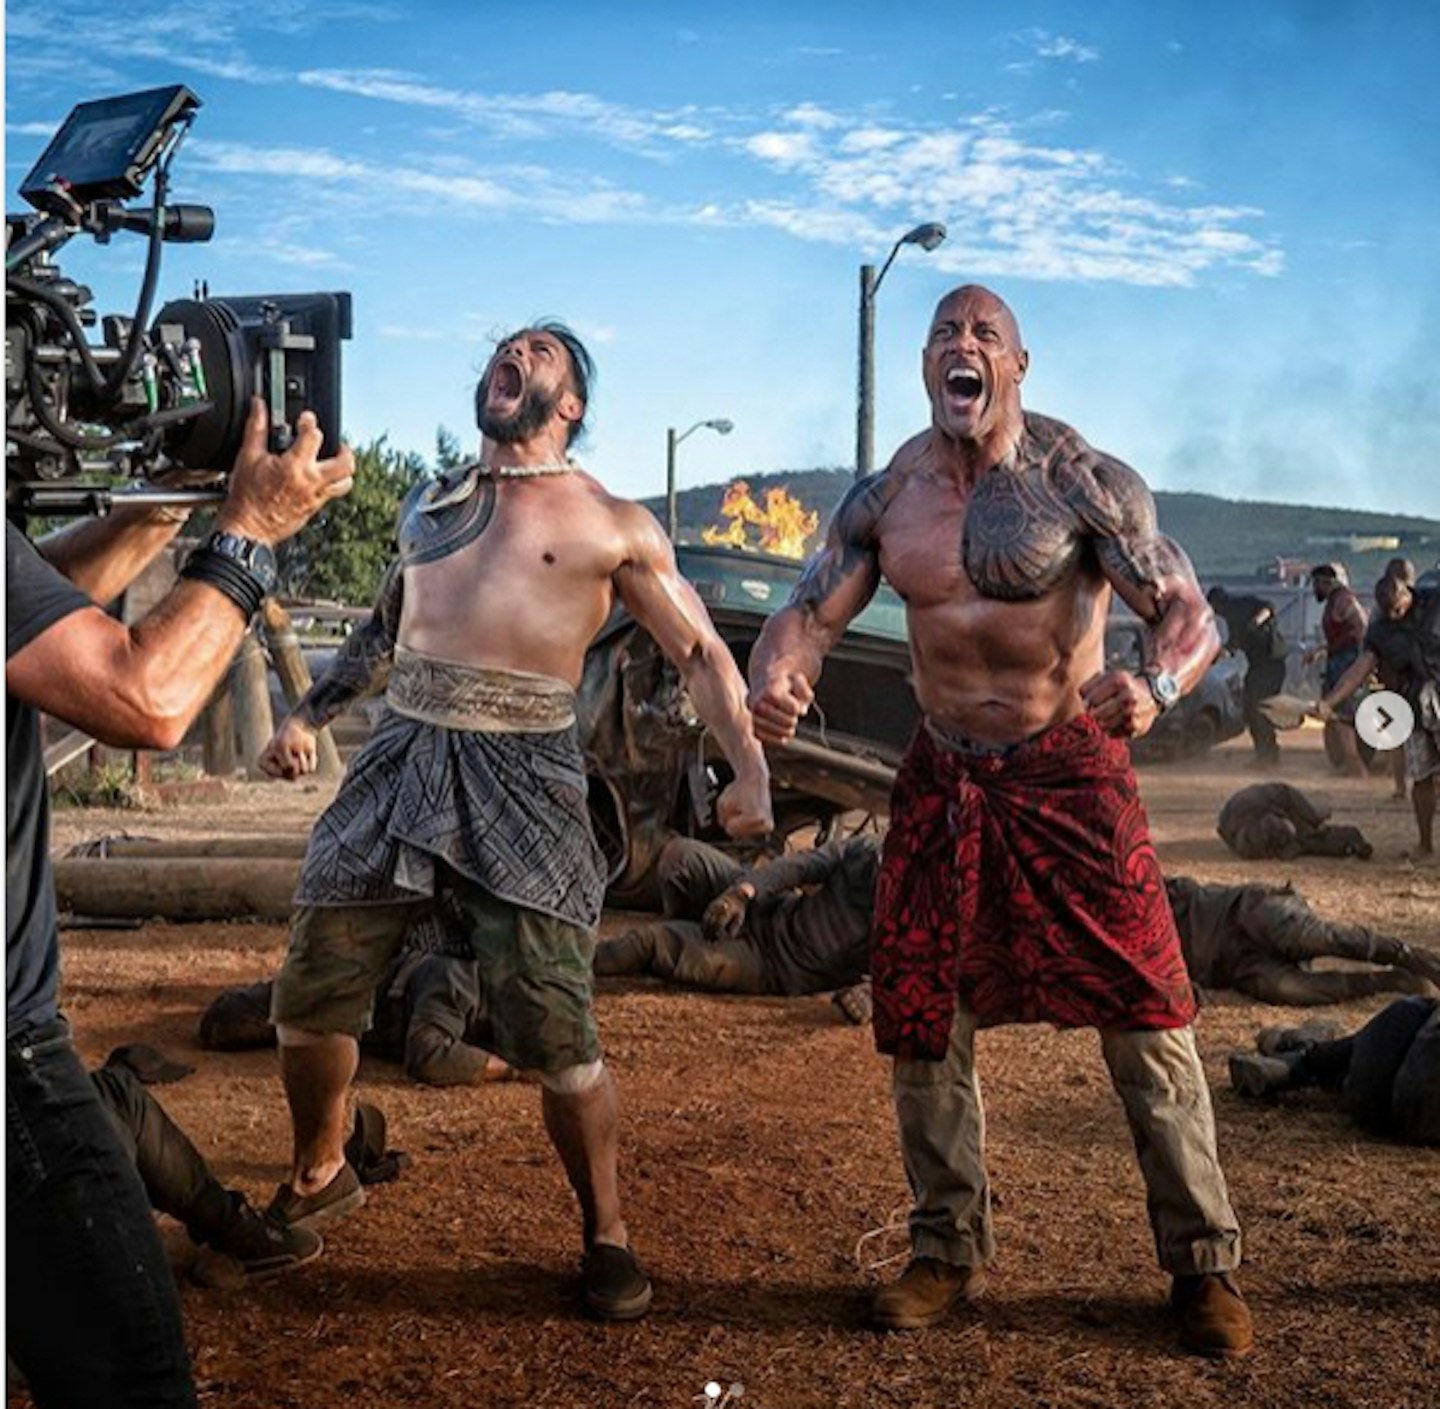 Roman Reigns and Dwayne Johnson on the set of Hobbs & Shaw (Insta)